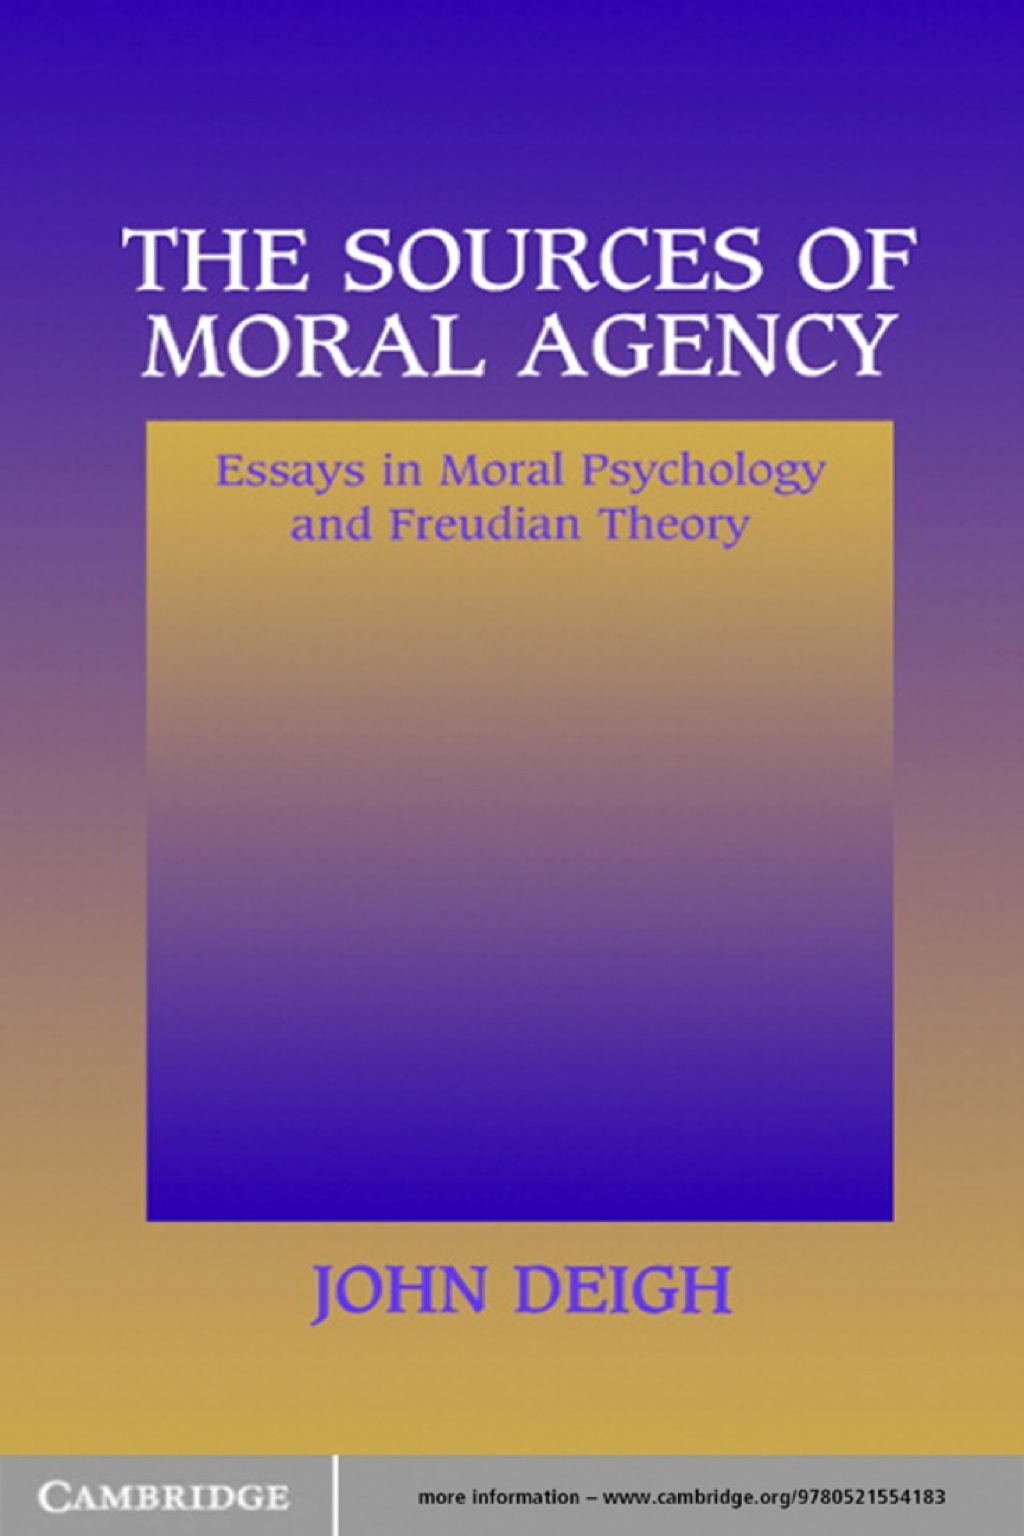 The Sources of Moral Agency (eBook) - John Deigh